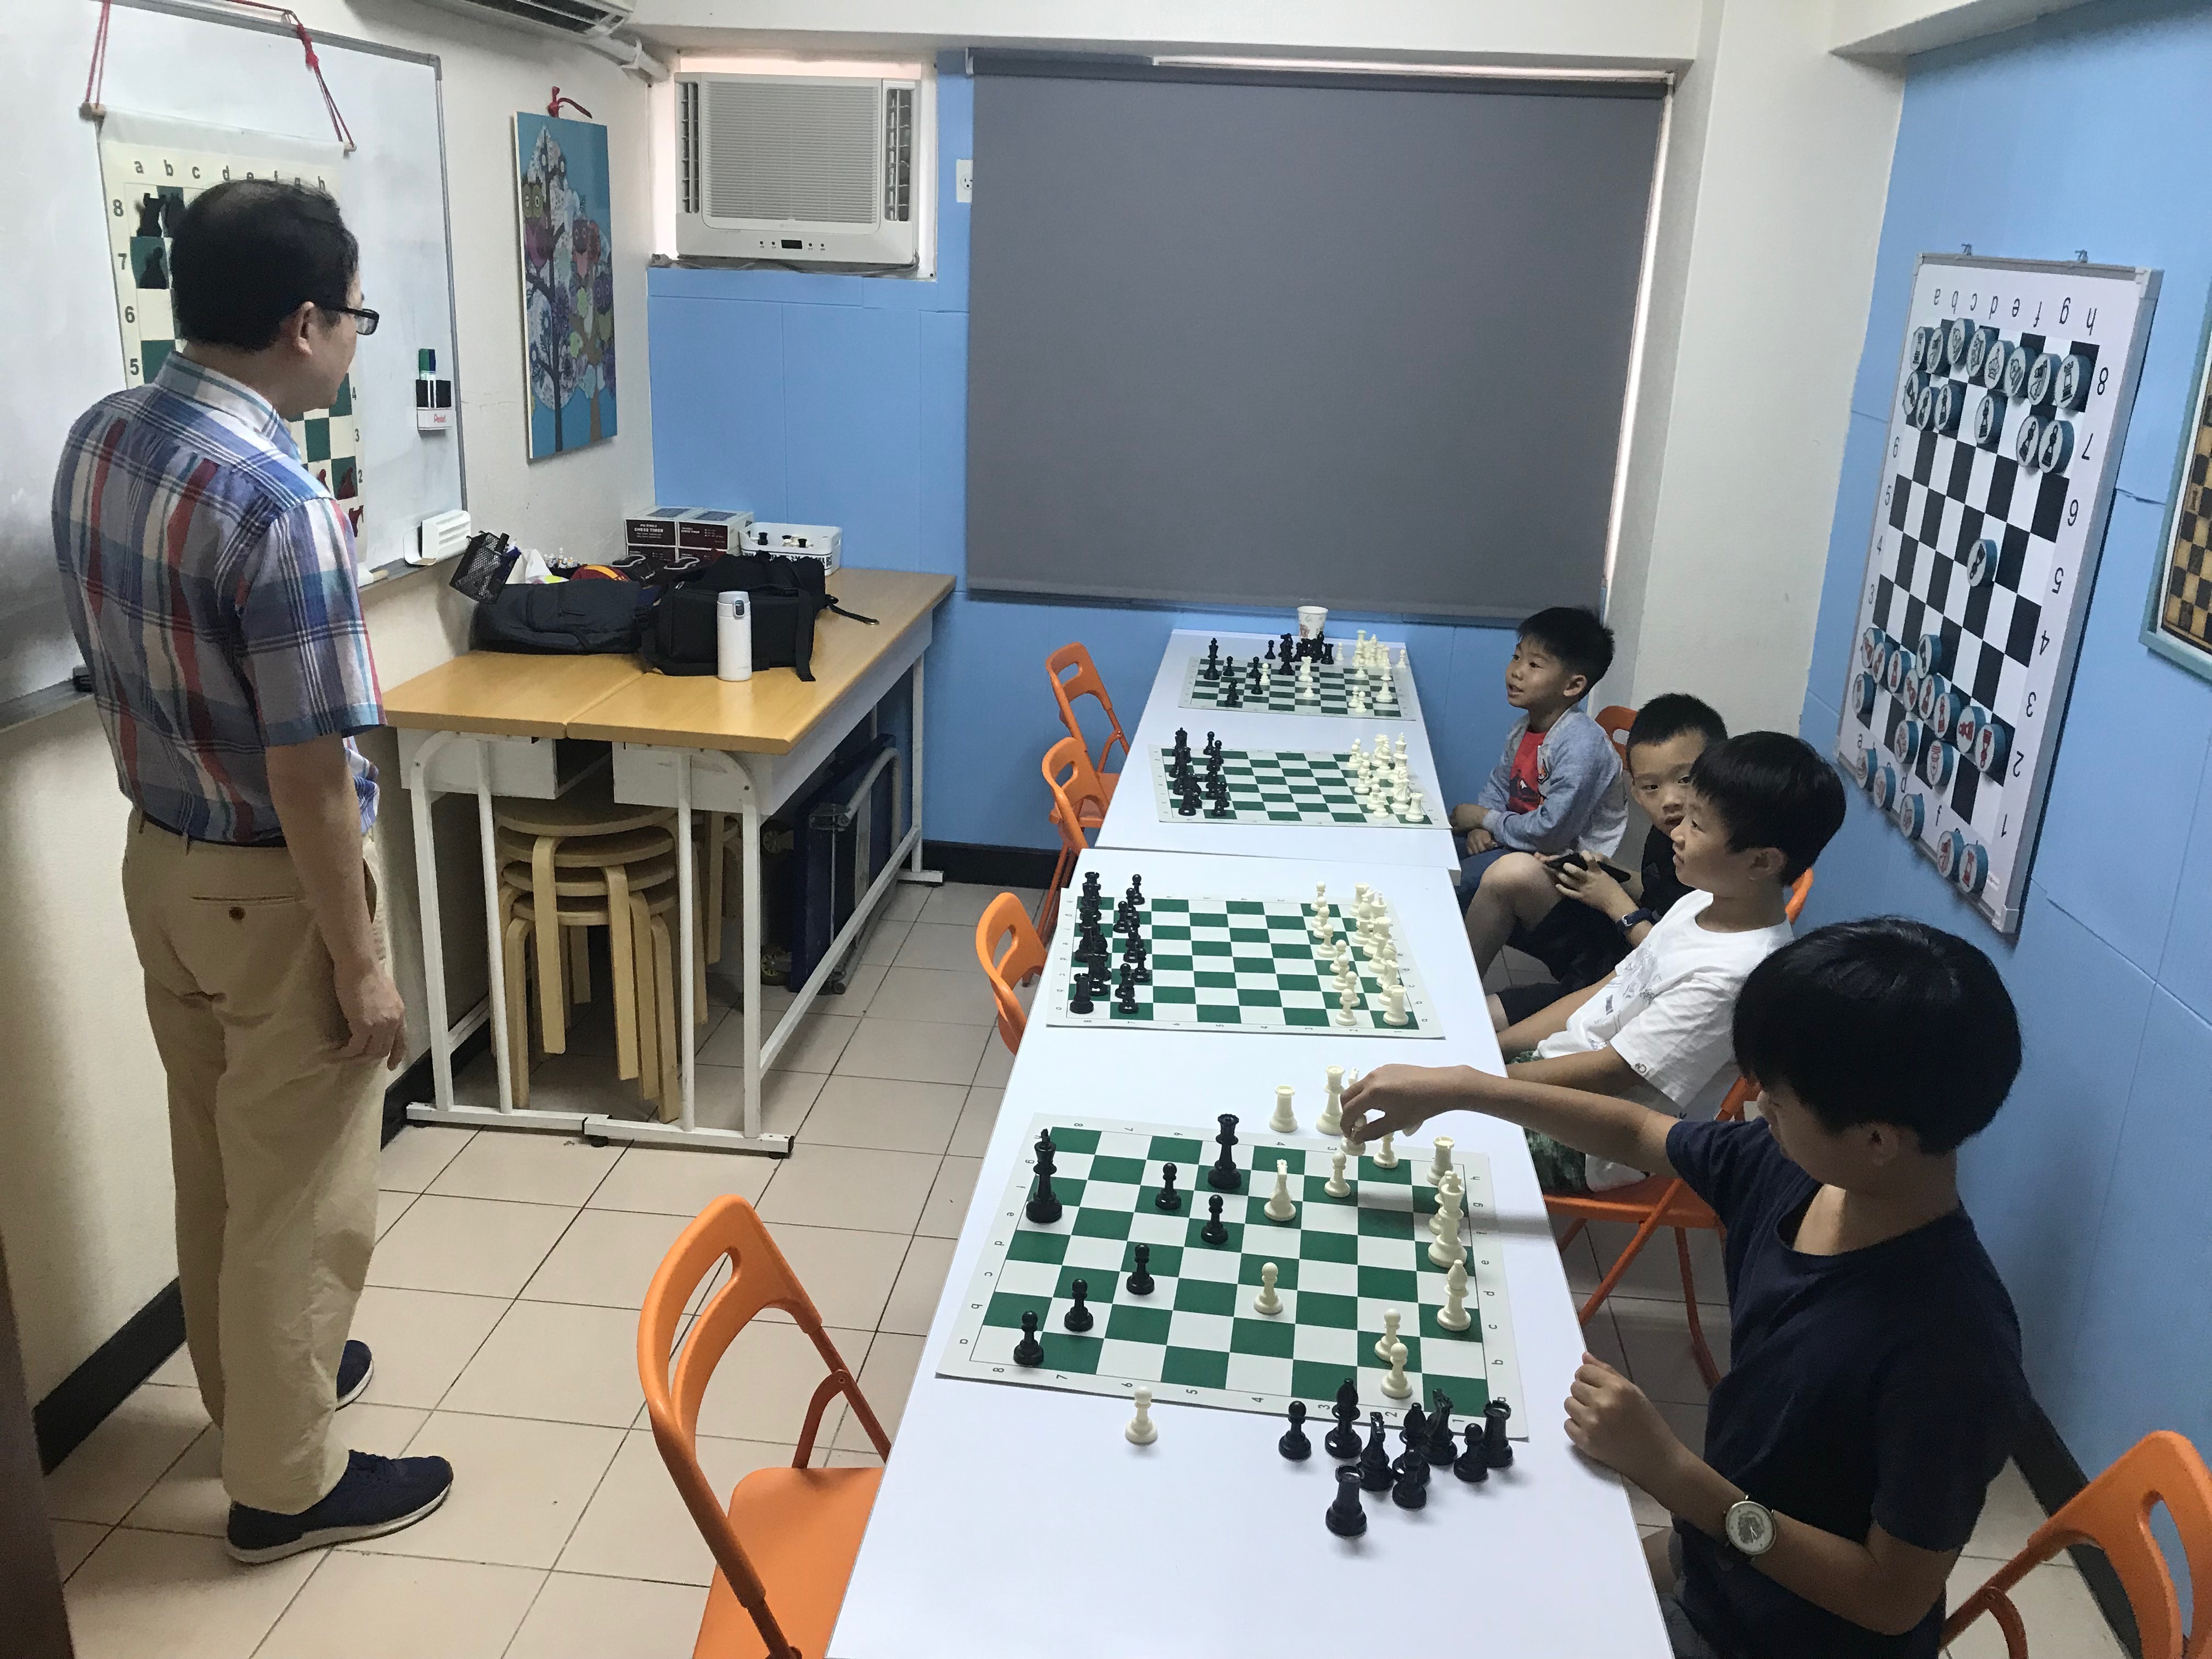 2019 summer chess camp kicked off today